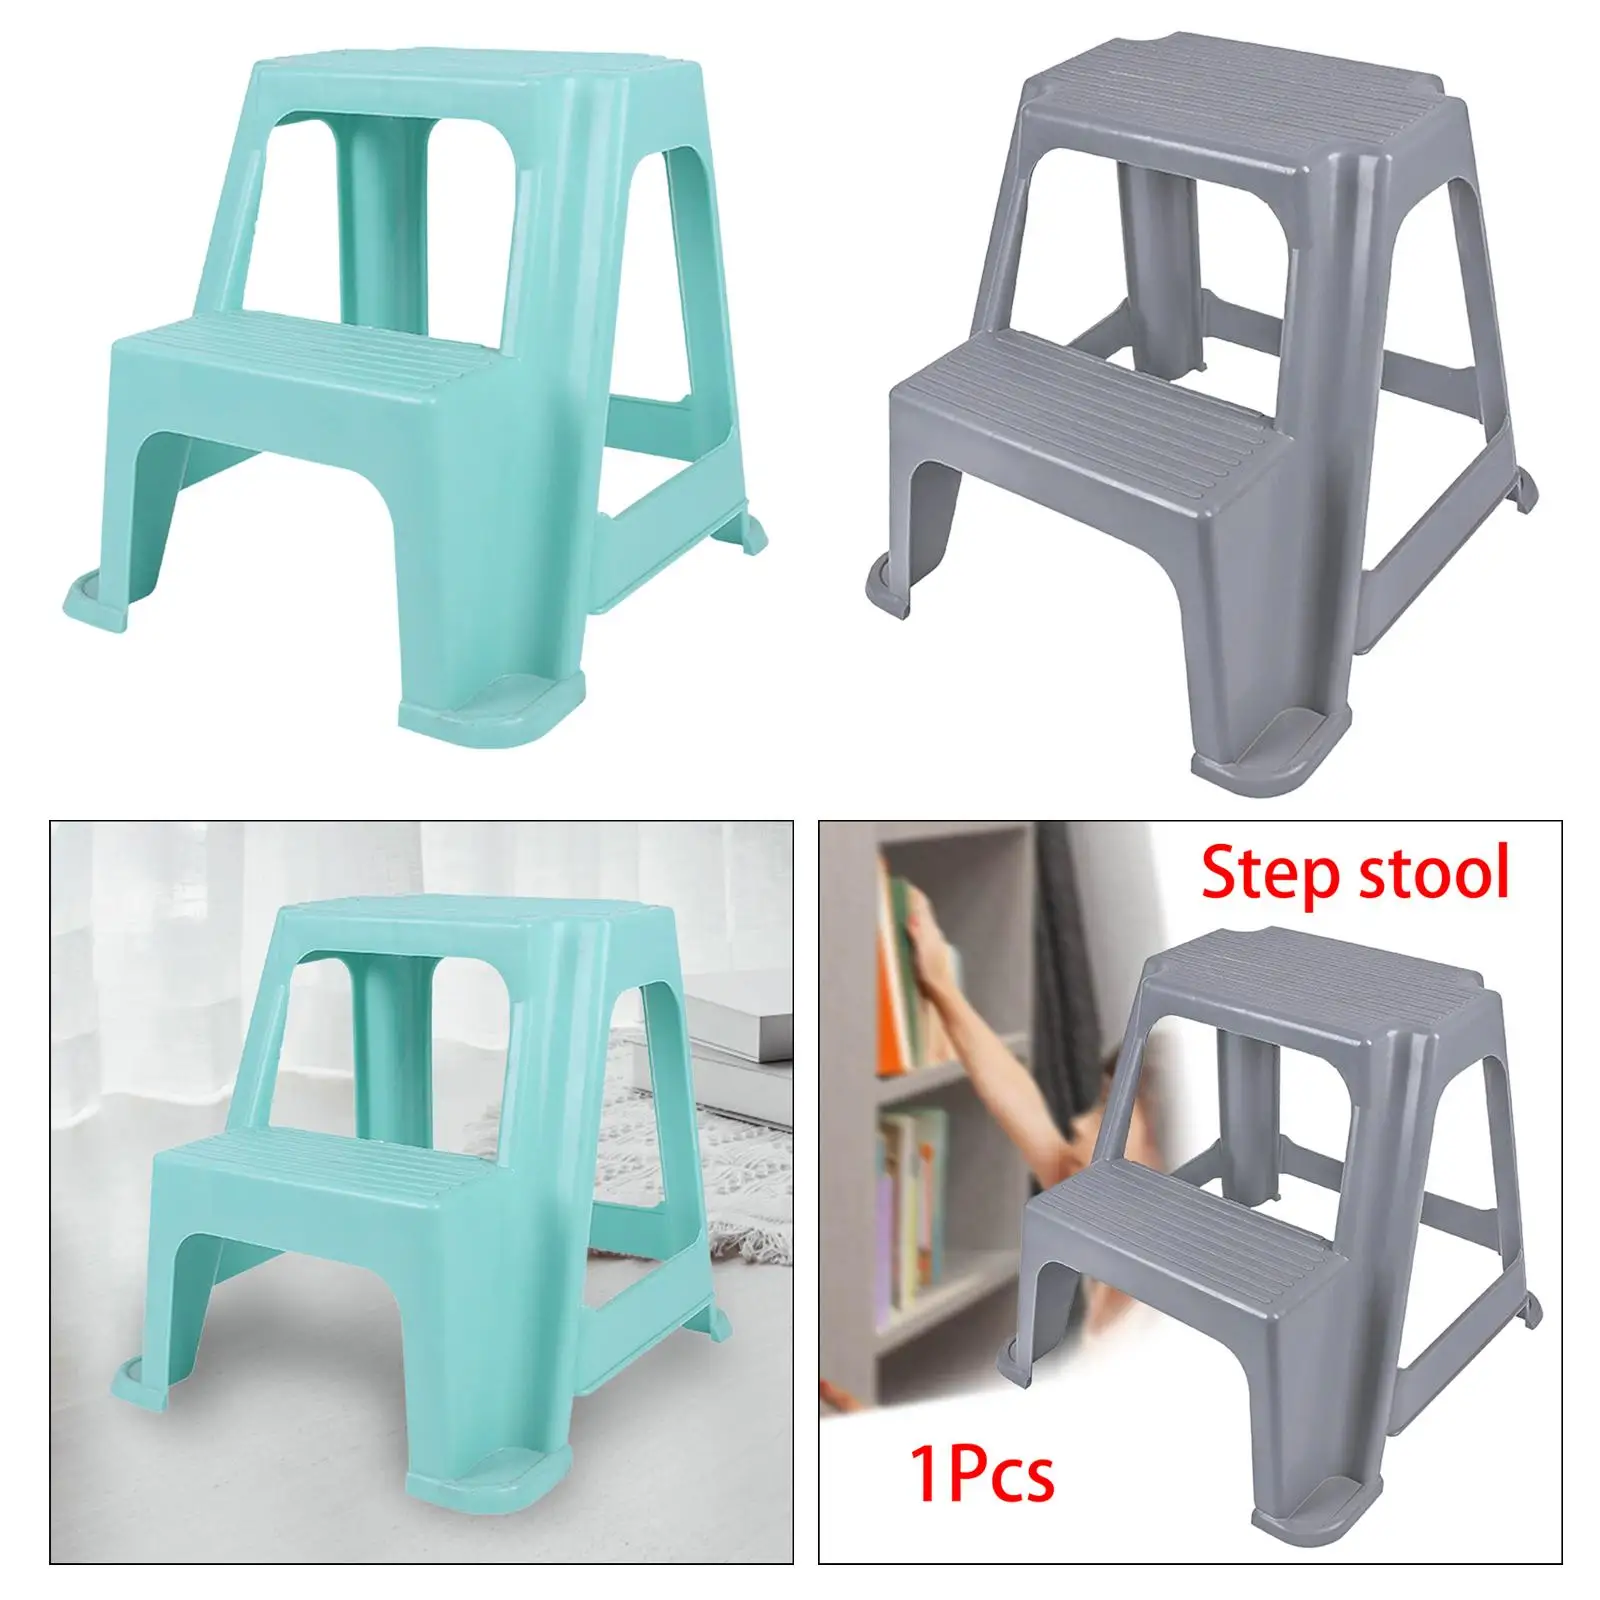 2 Step Stool Non Slip Portable Footstool Bedside Step Stool Lightweight Two Step Stool for Kids Toddlers Dogs Seniors Nursery